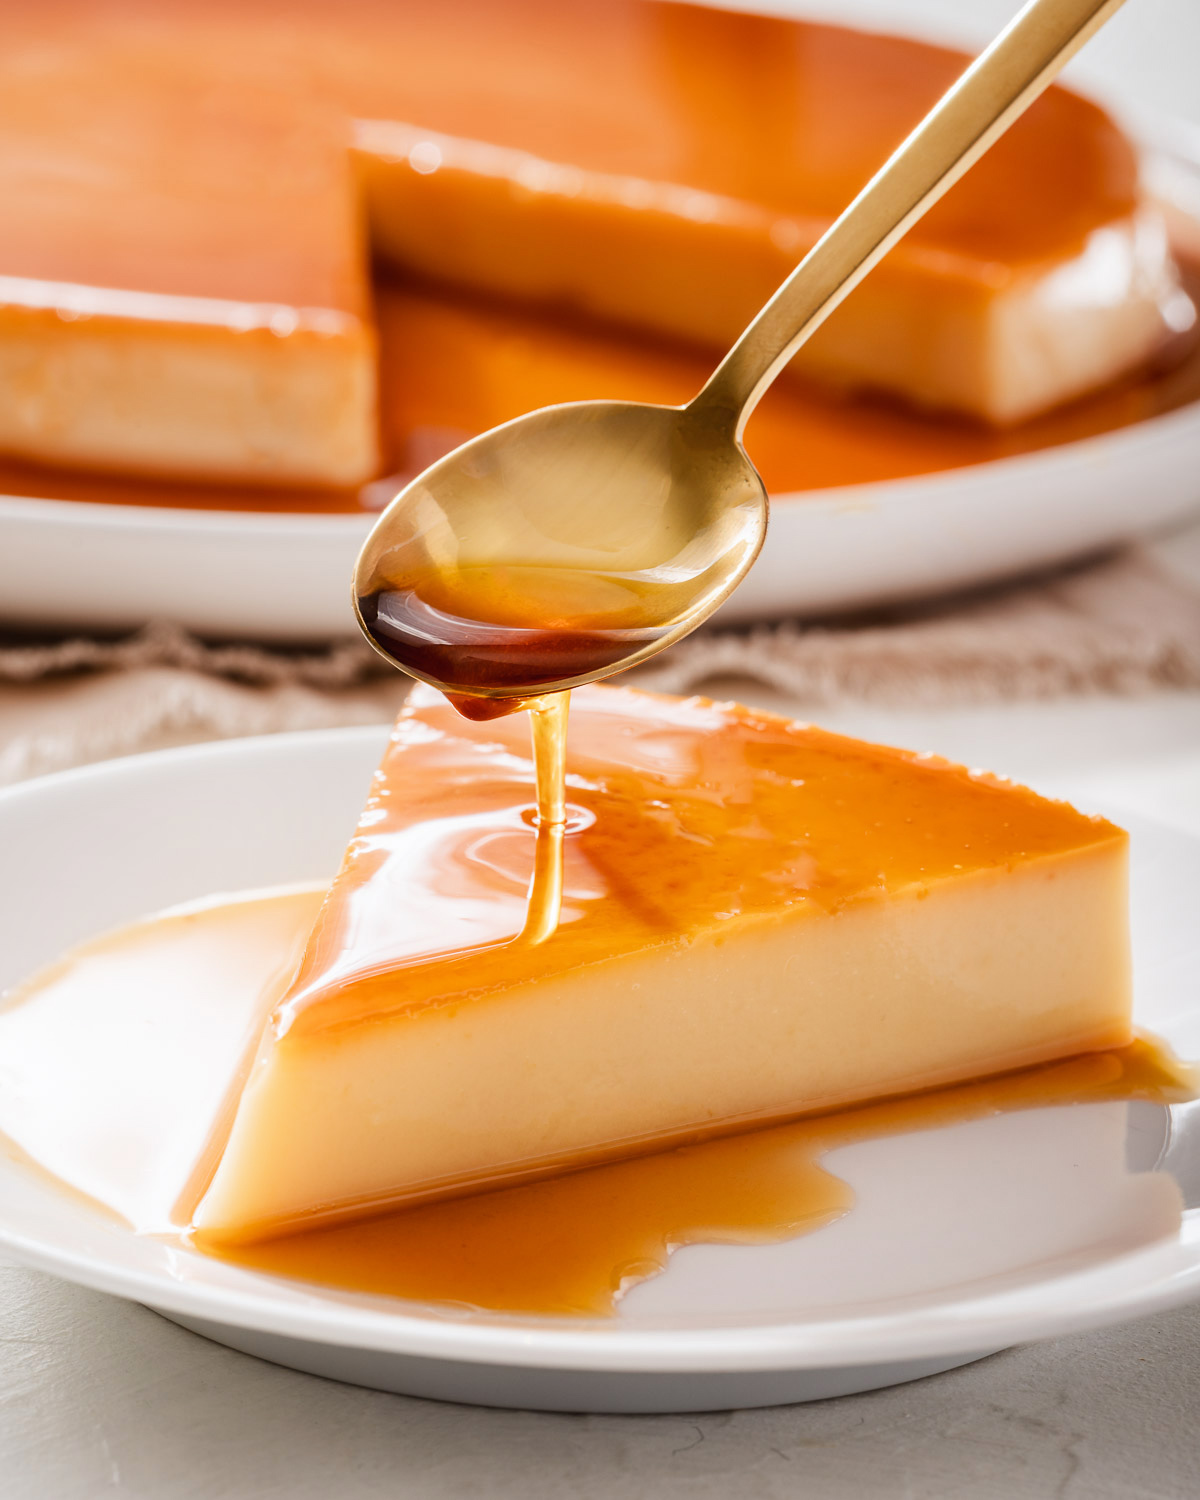 A slice of flan being drizzled with creme caramel on a small plate.